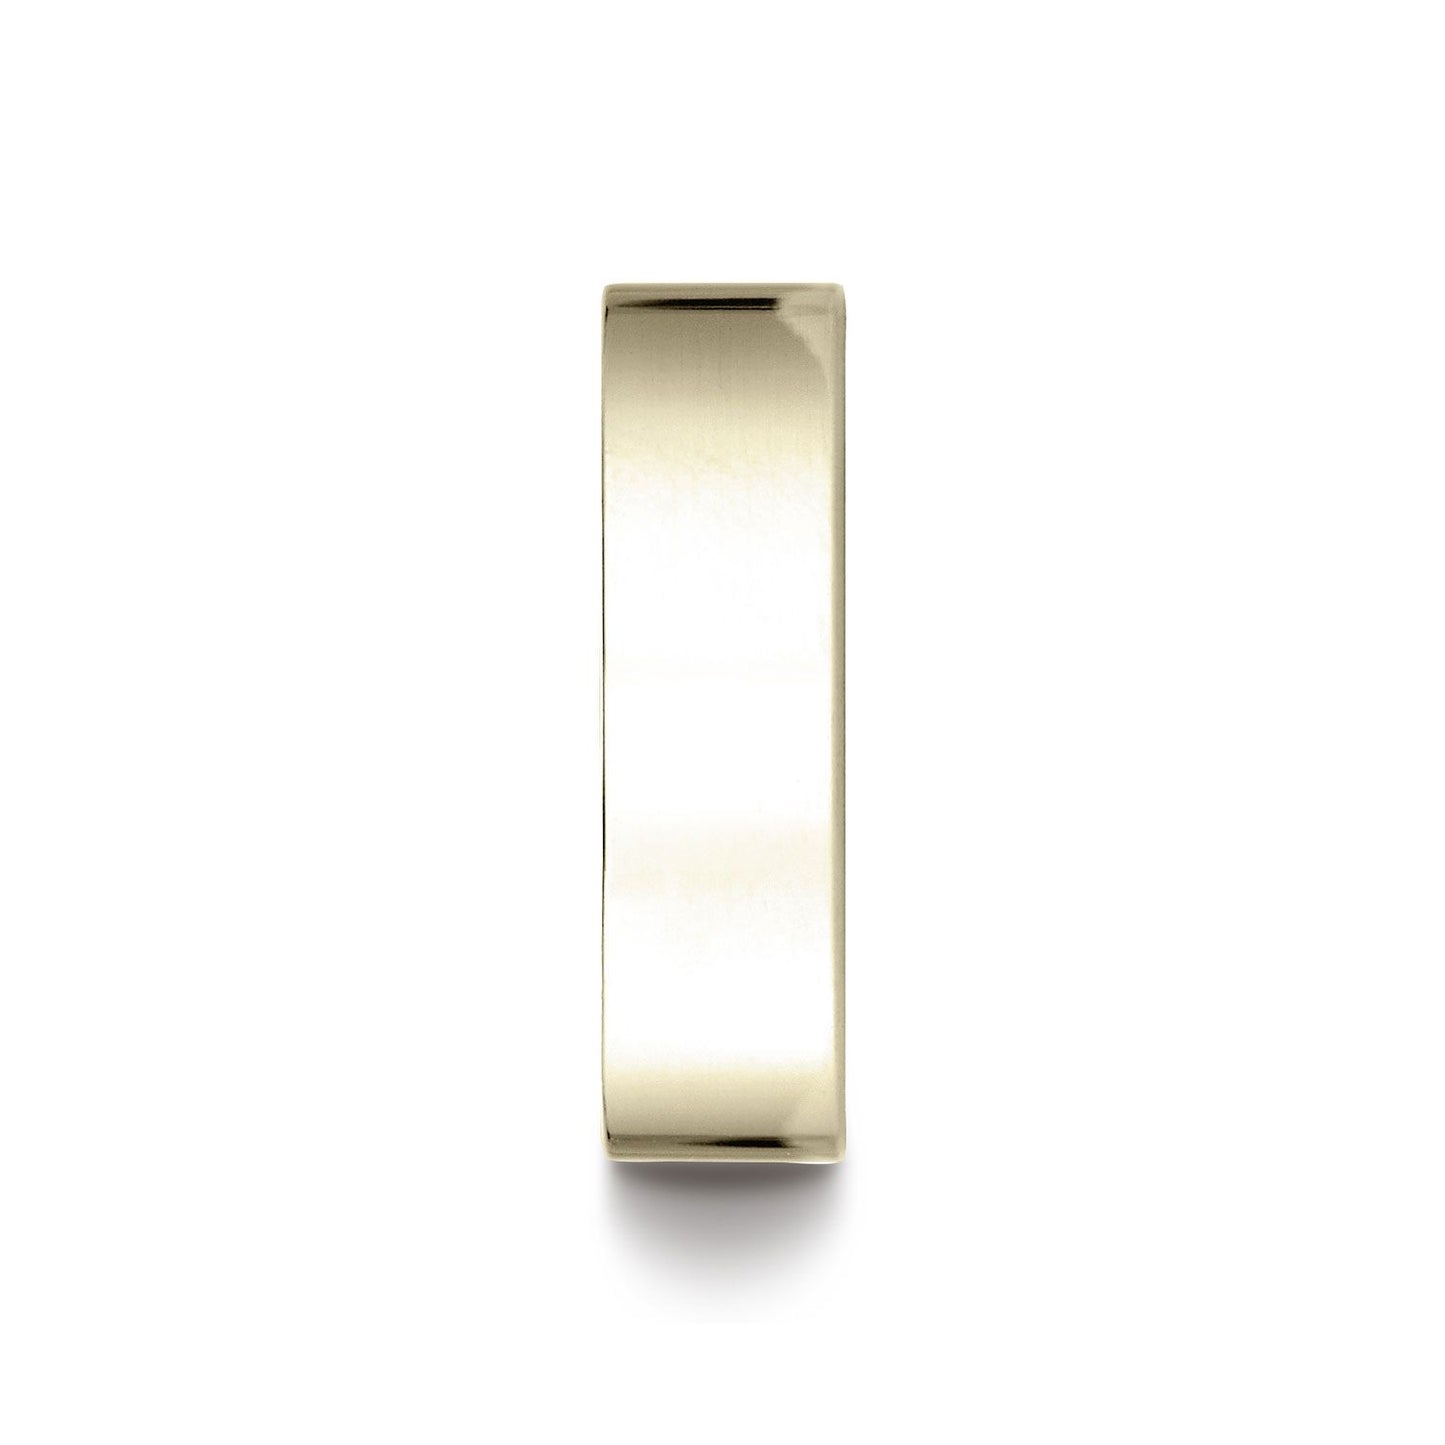 14k Yellow Gold 6 Mm Traditional Flat Ring